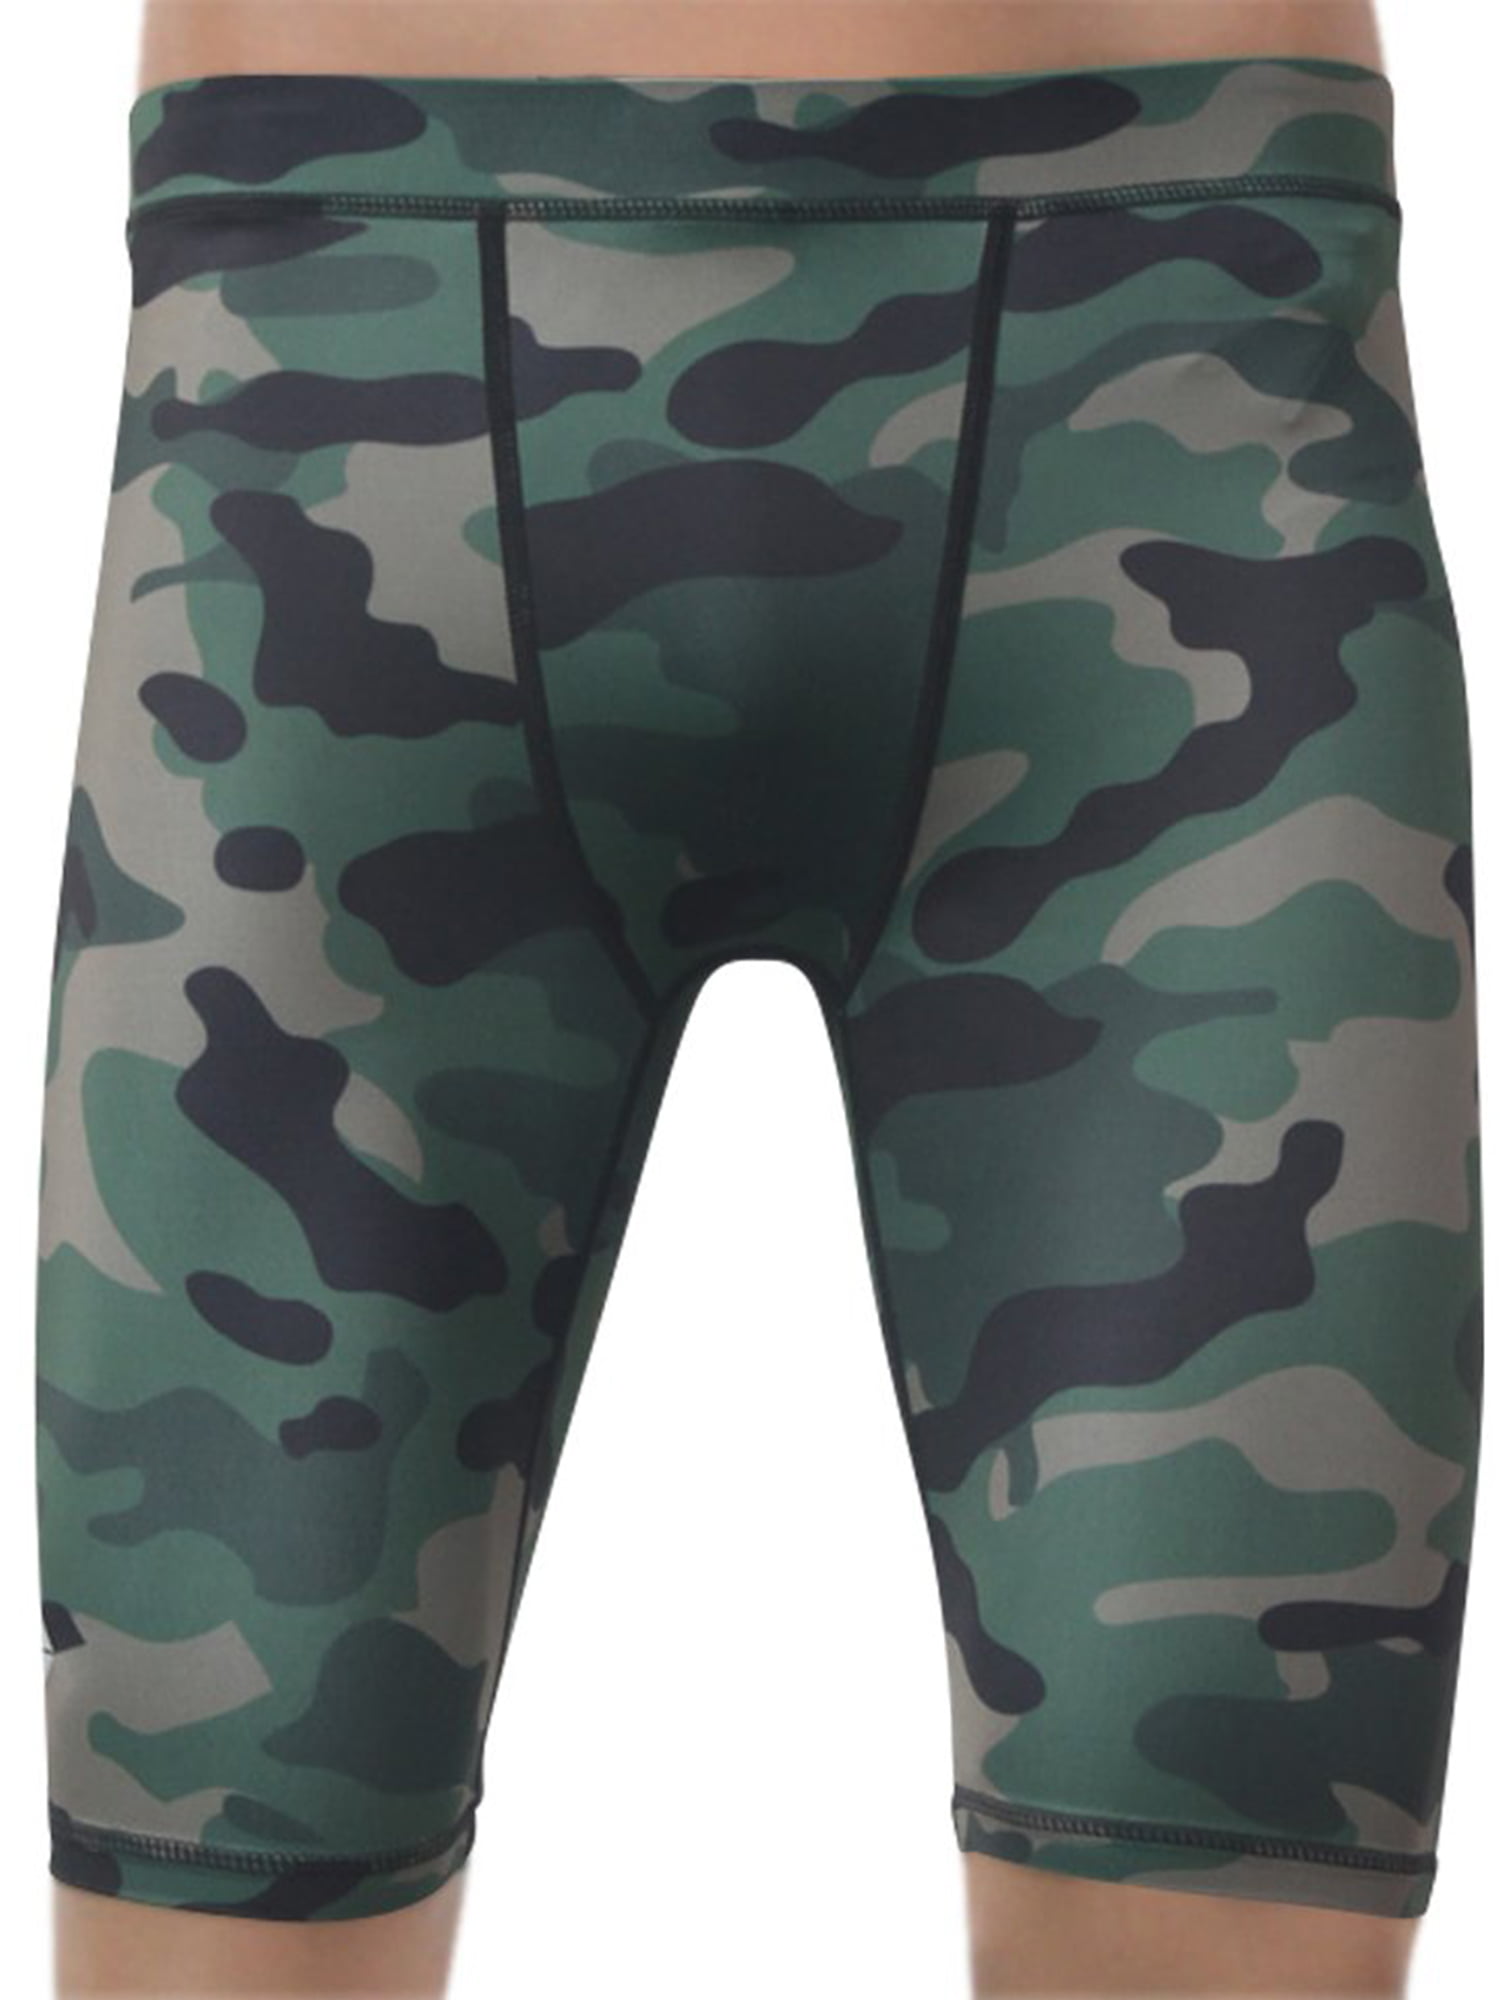 Men's Athletic Compression Shorts Running Basketball Workout Tights Spandex Camo 